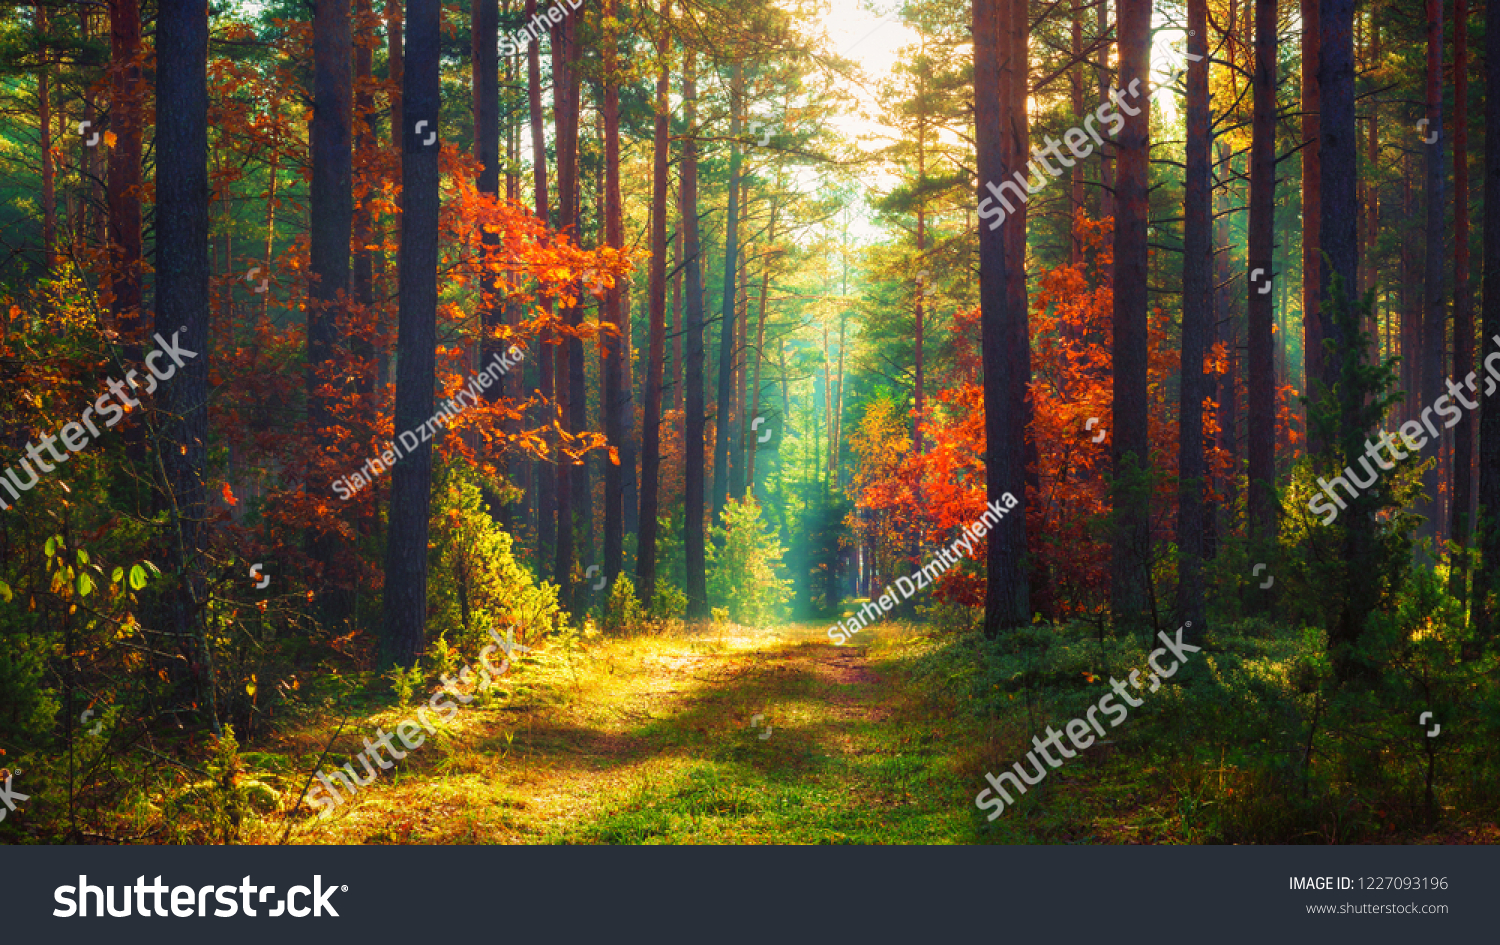 Autumn nature landscape of colorful forest in morning sunlight #1227093196